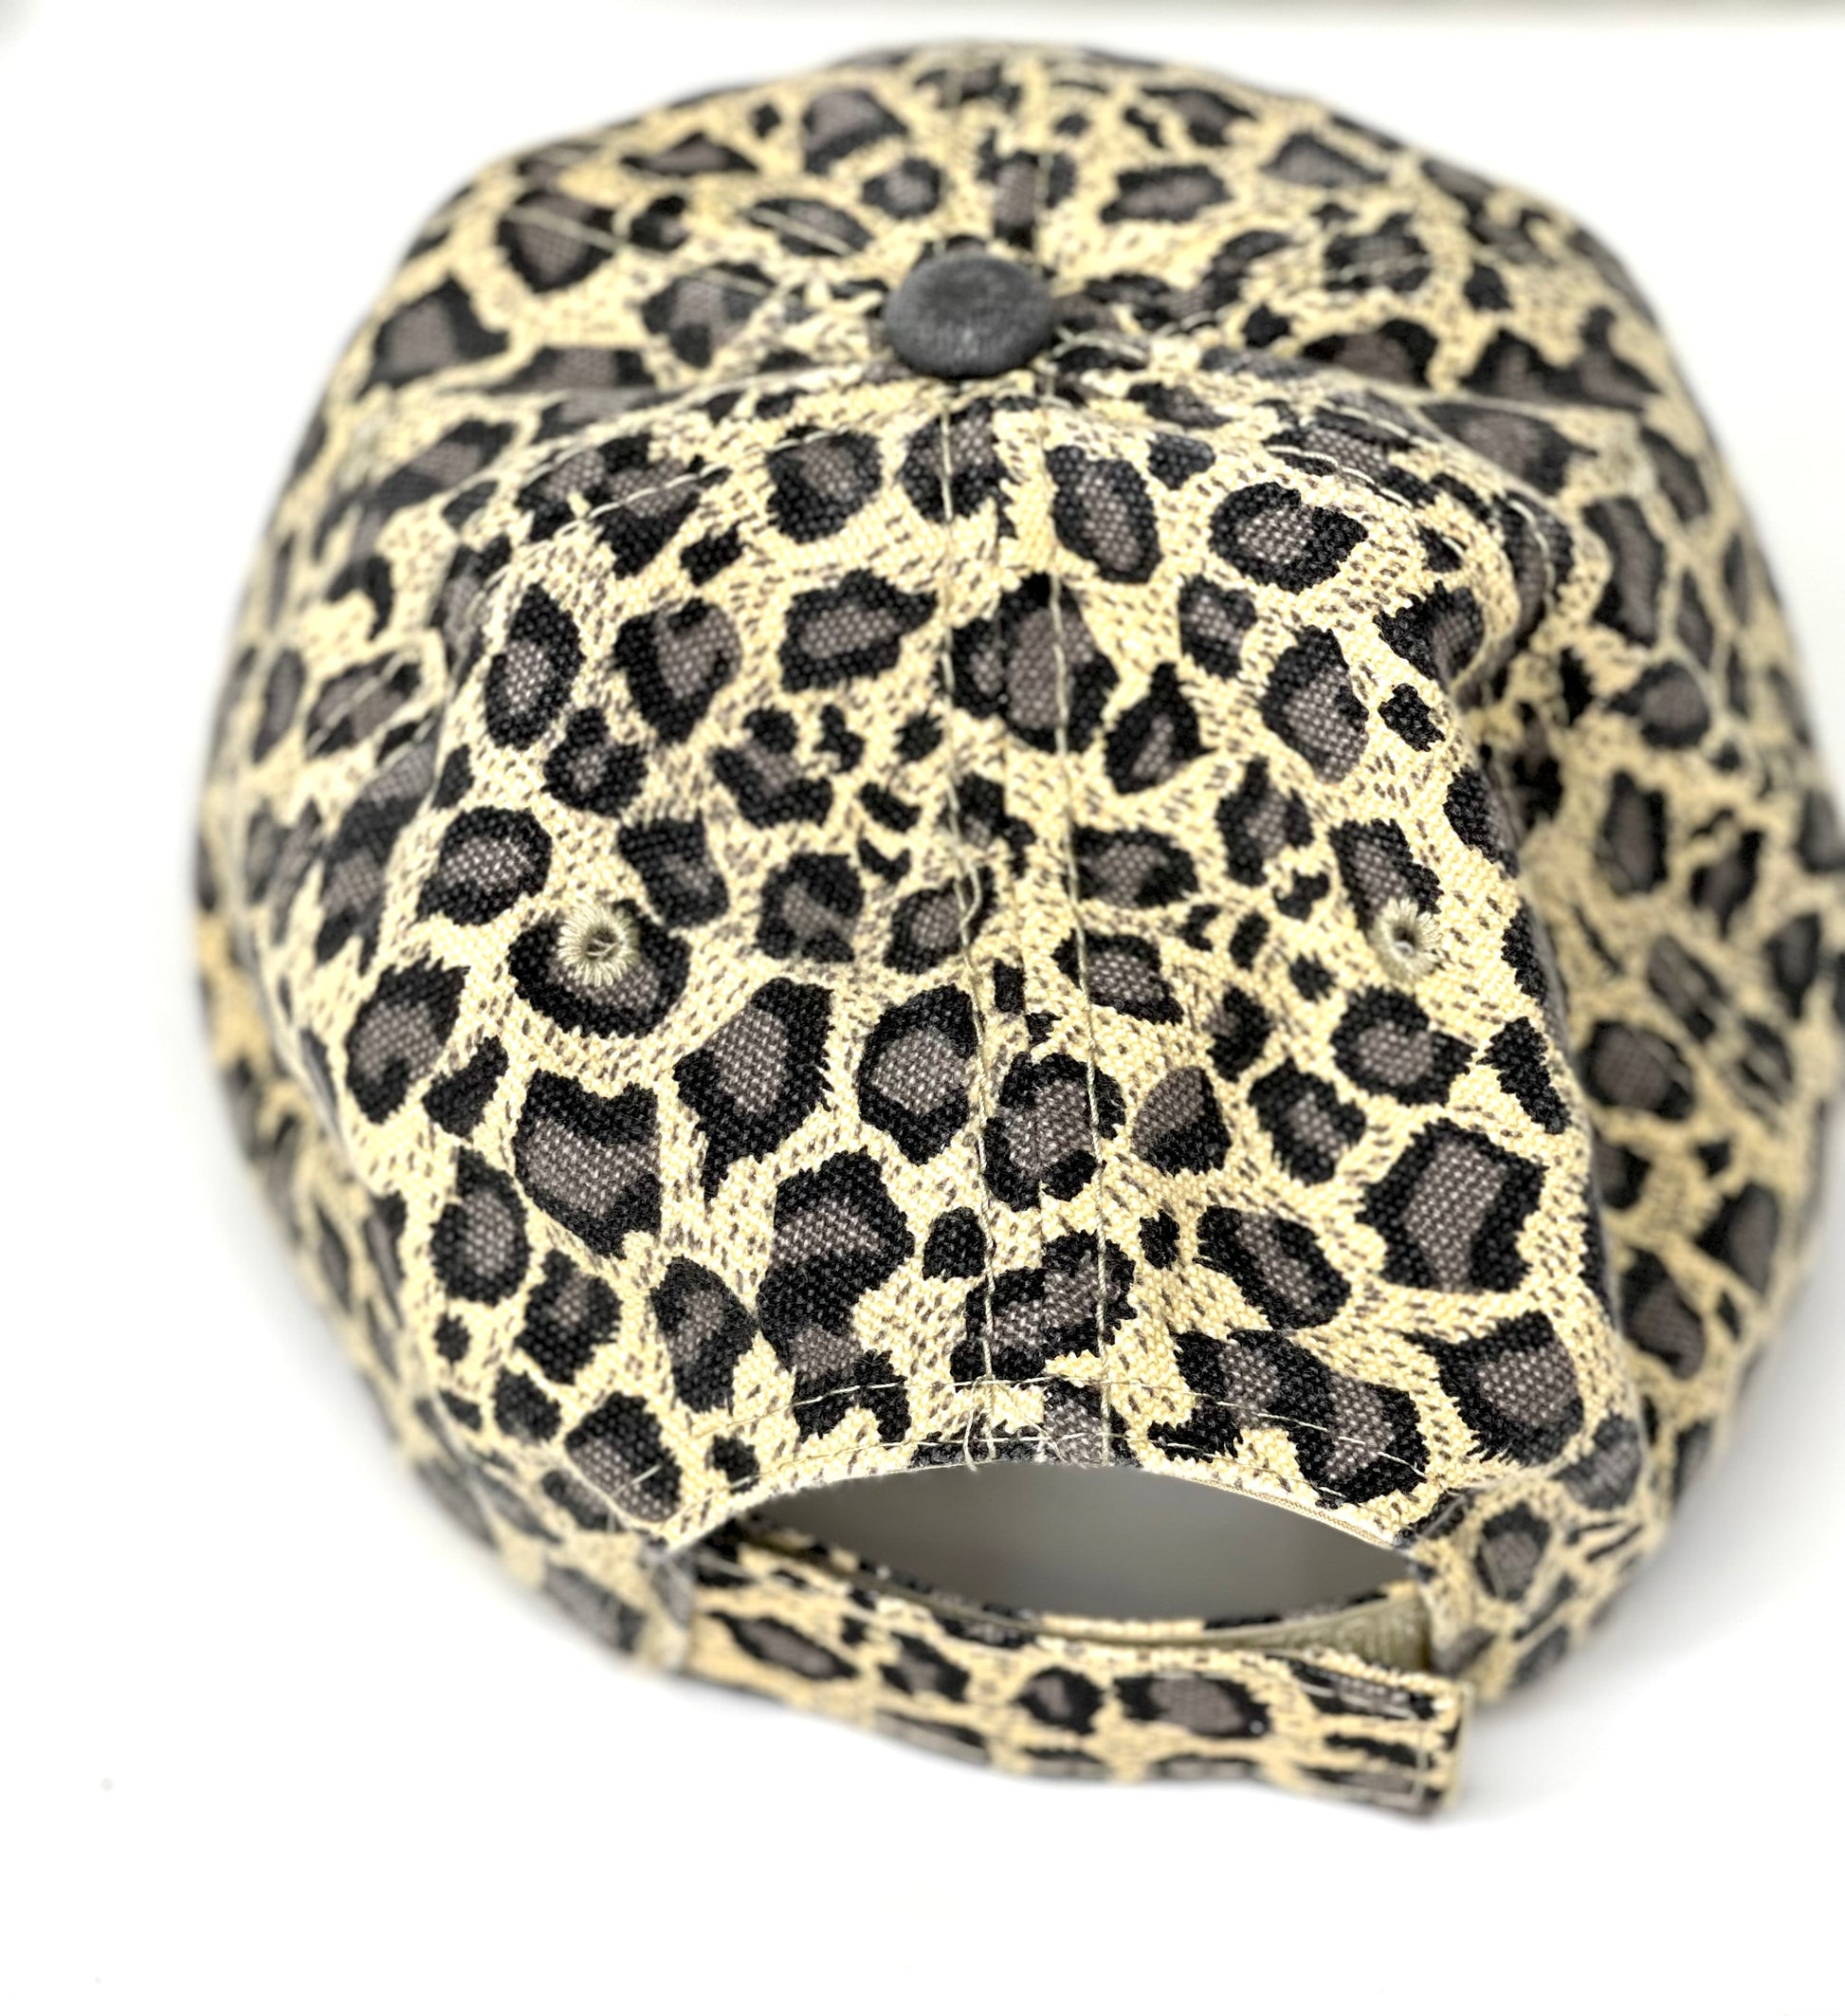 P4 - Cream Leopard hat with Distressed Black bill Black/Black - Patches Of Upcycling